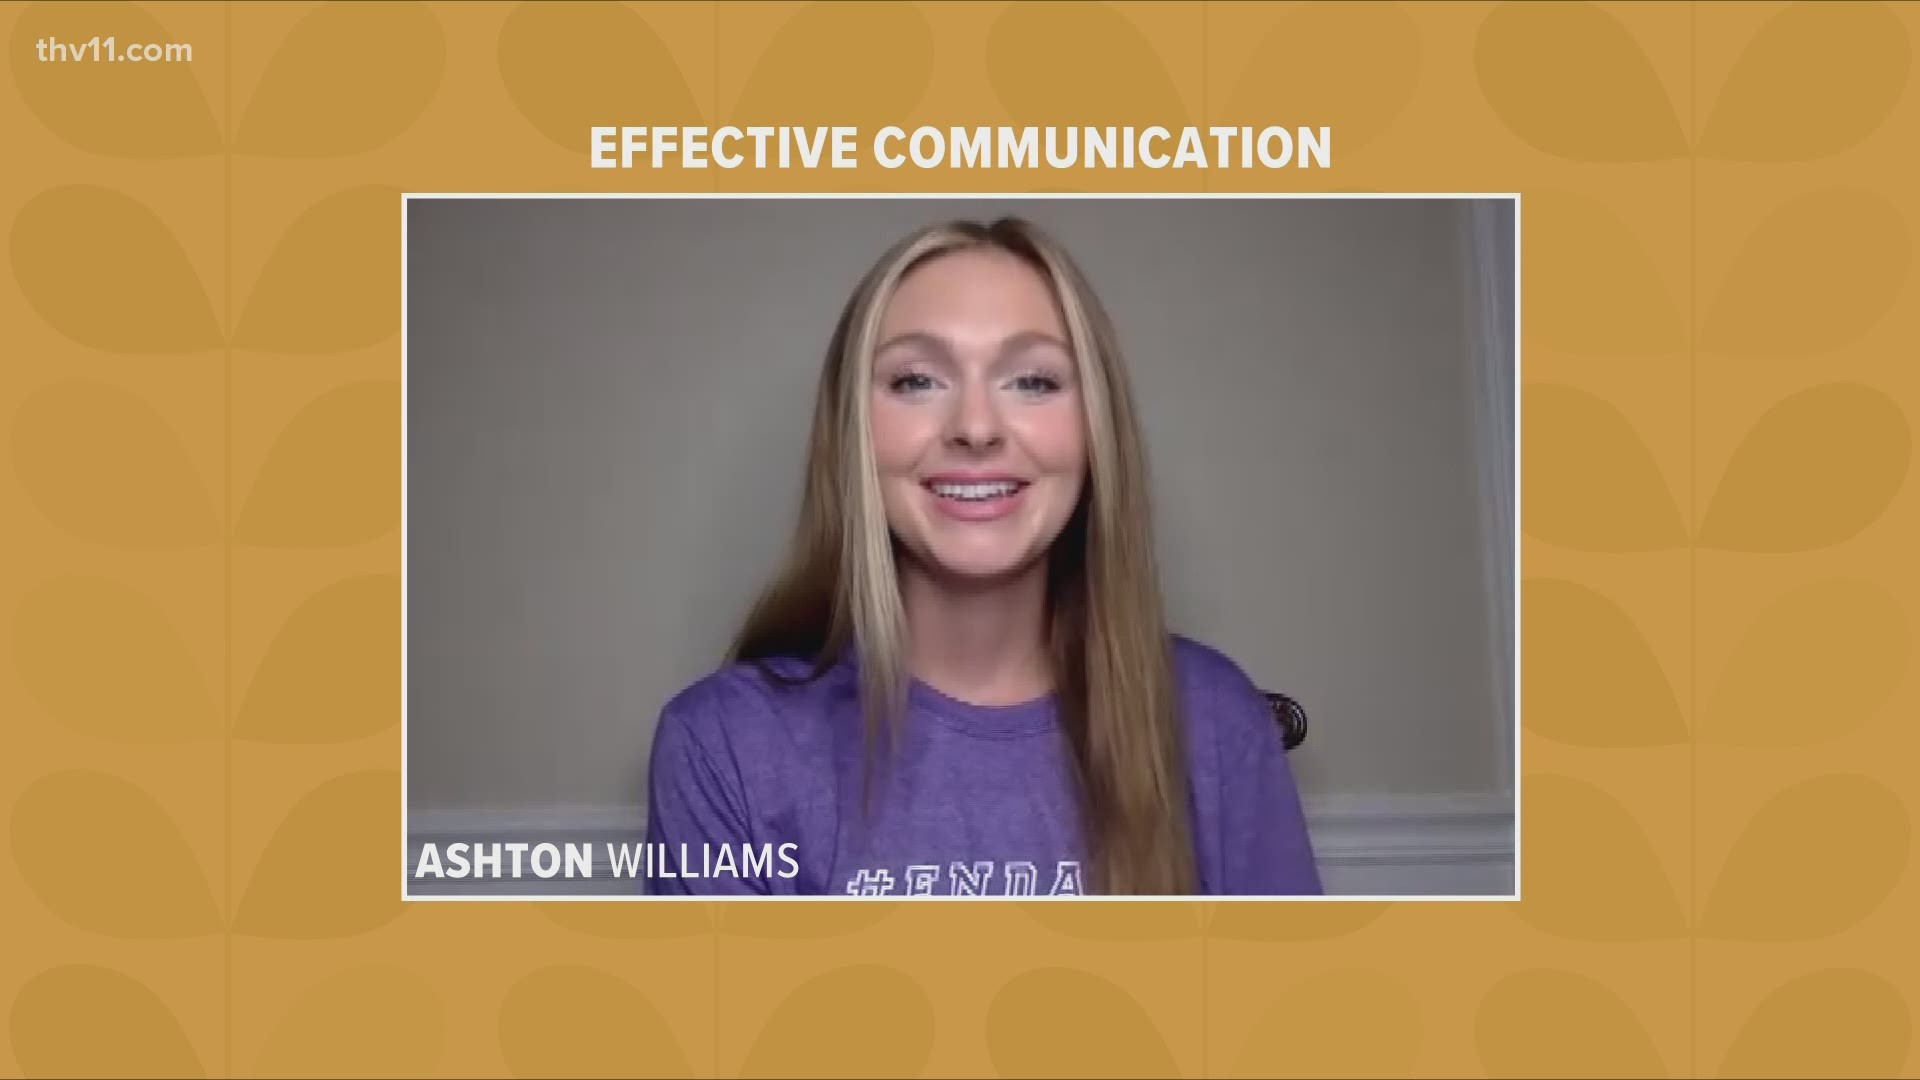 Ashton Williams shares communication strategies that can help your loved one diagnosed with Alzheimer’s or other dementia.